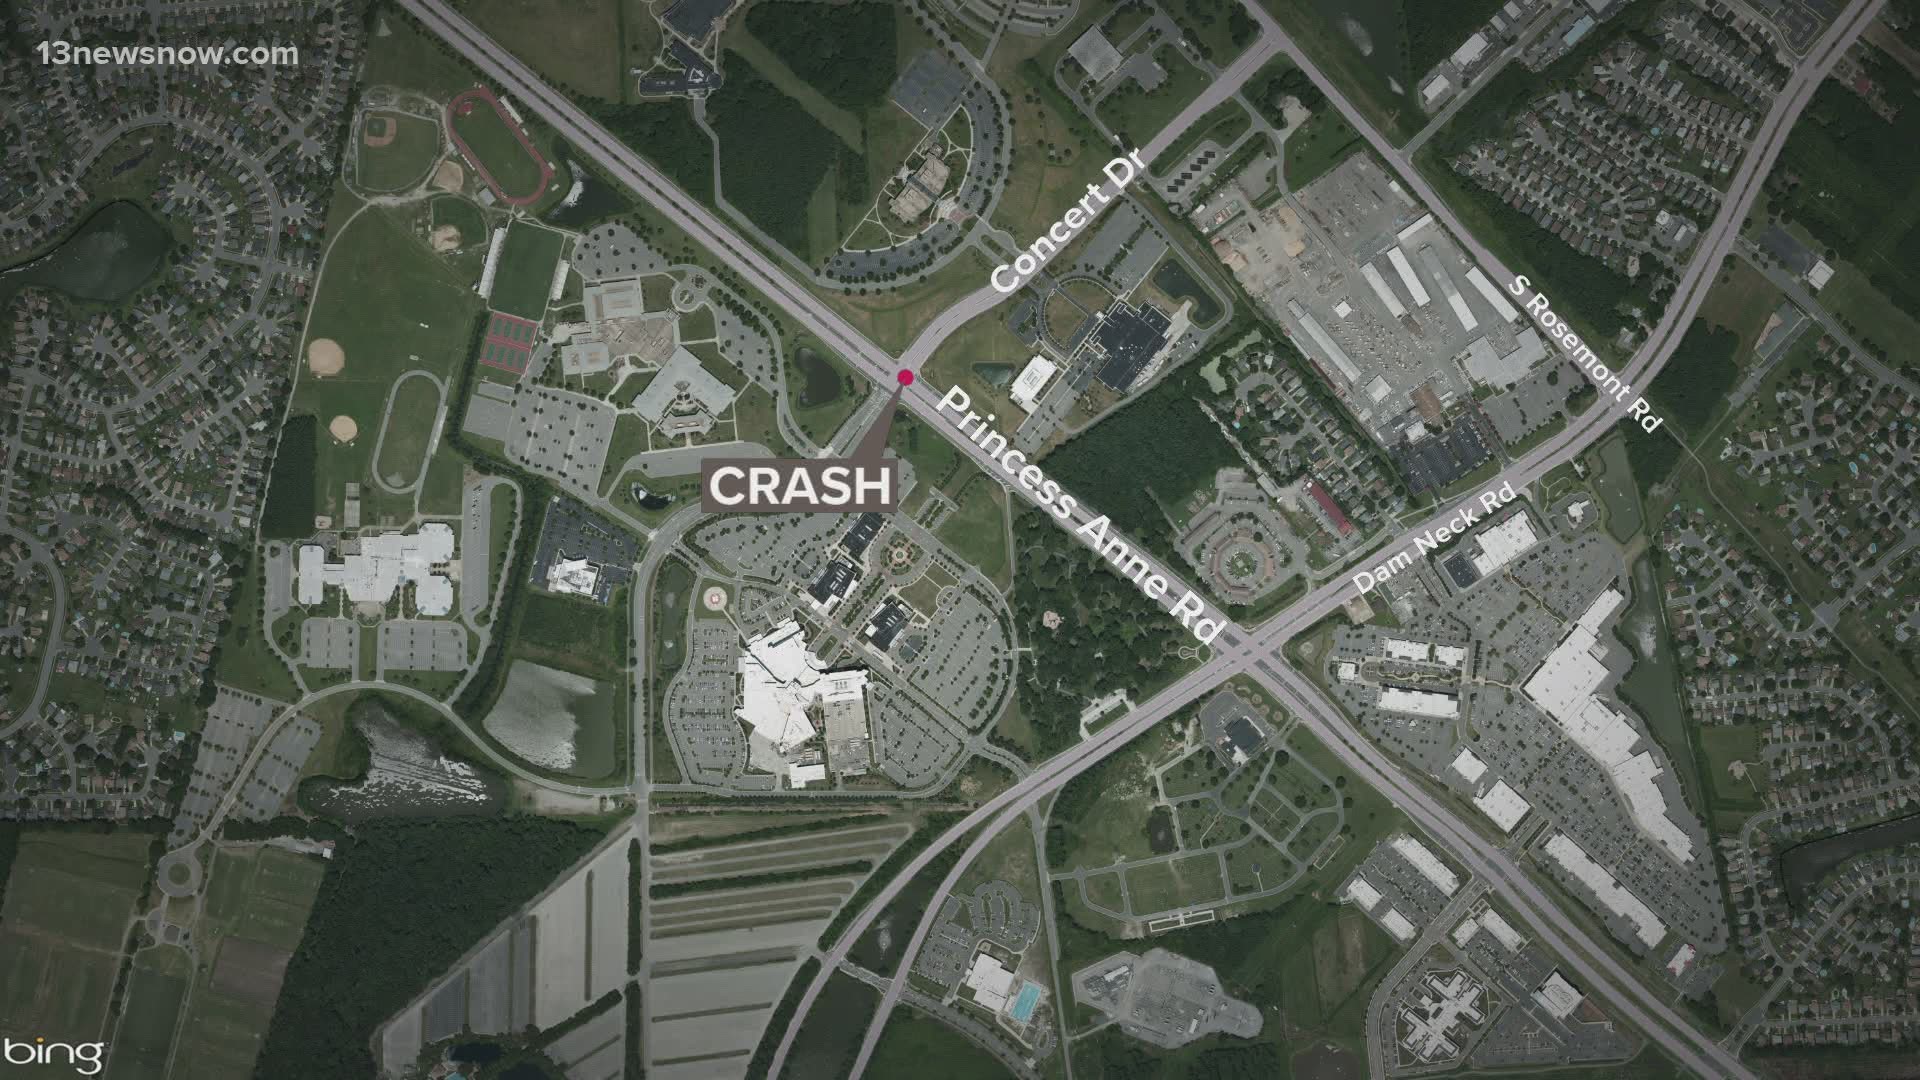 The crash happened near Sentara Princess Anne Hospital. There were five people who were hurt, but officials said they are expected to be okay.